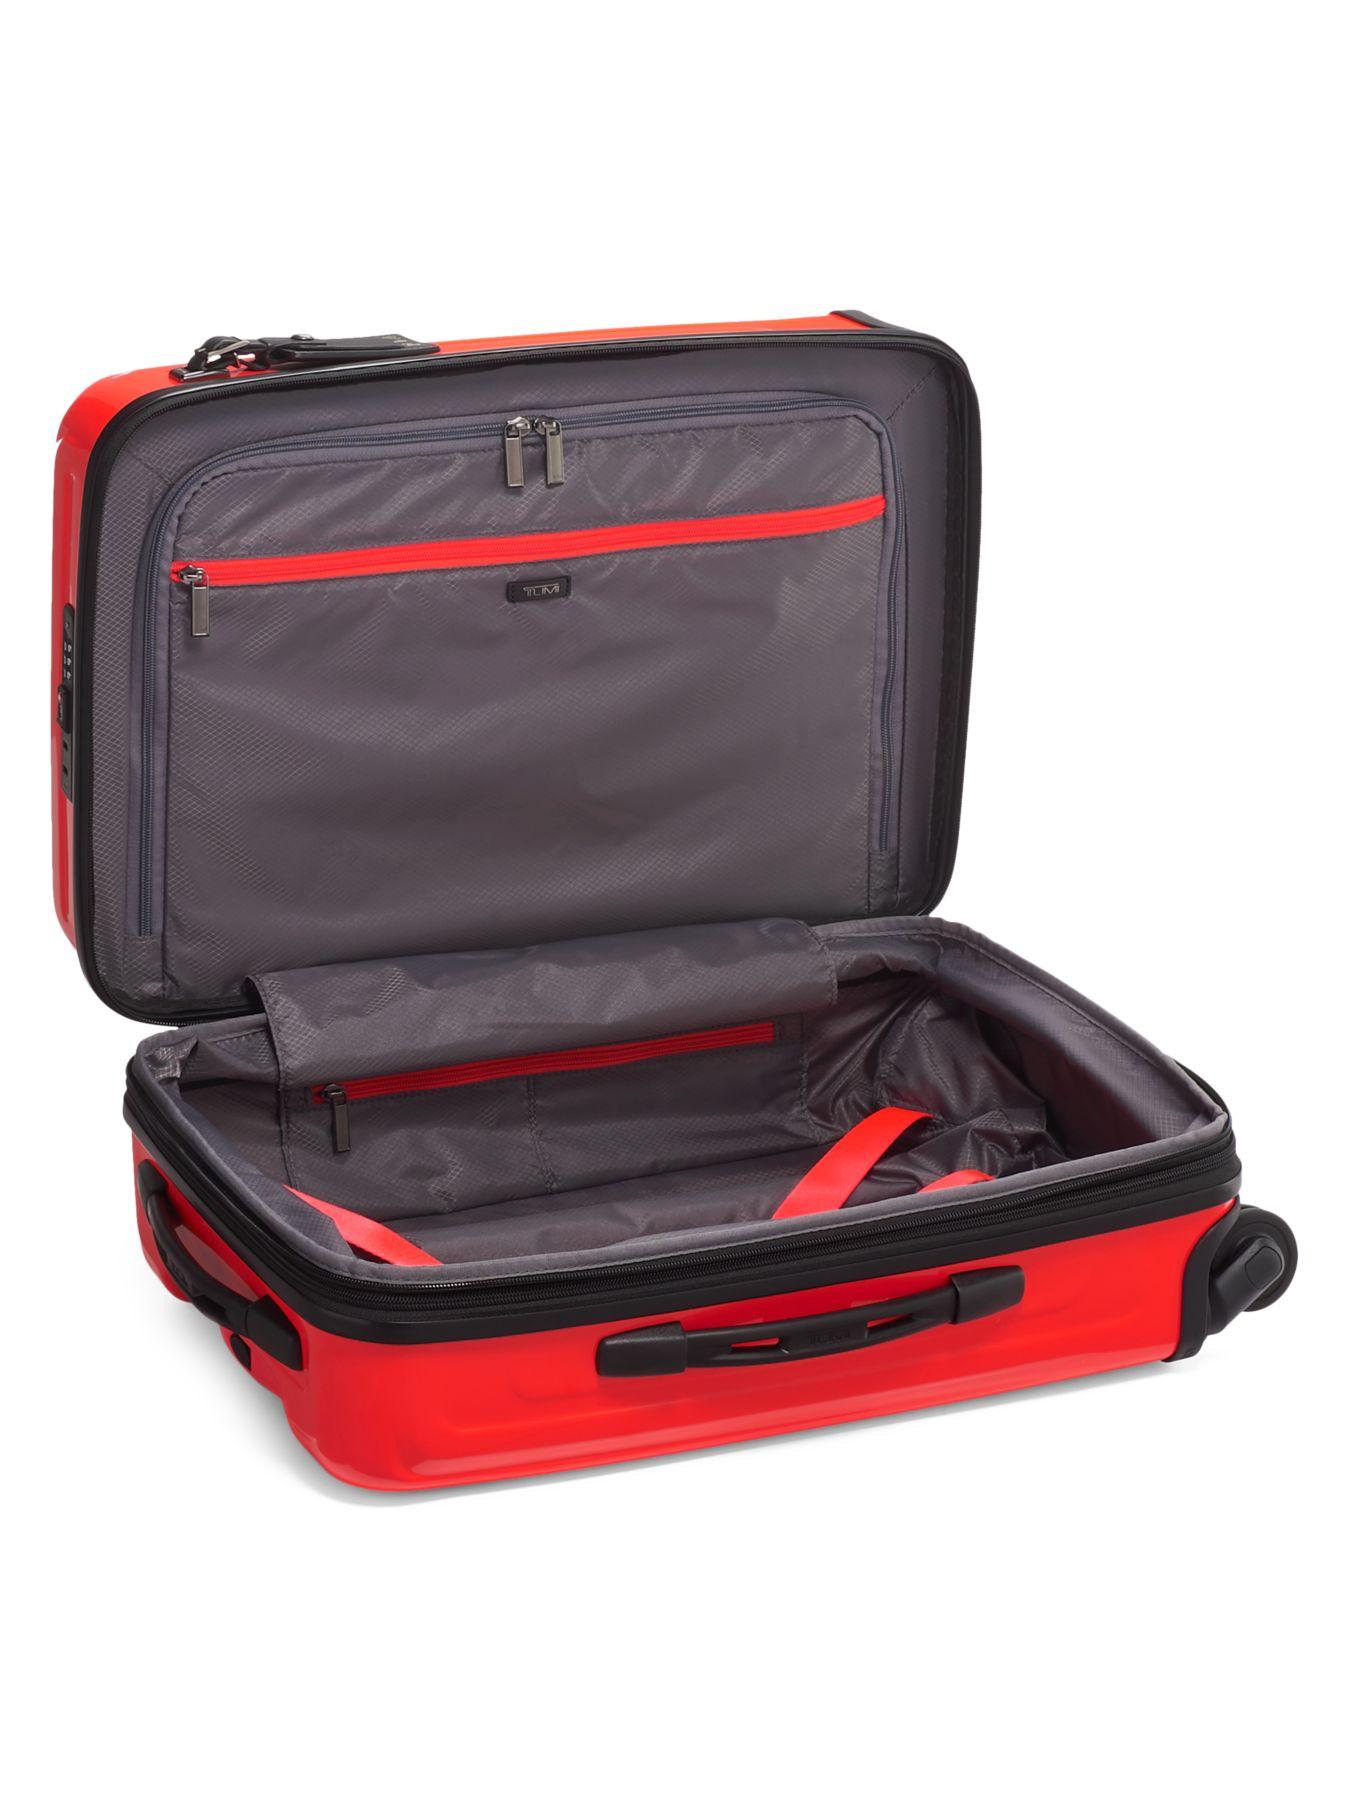 Tumi V4 International Expandable Carry-on Luggage in Bright Red (Red ...